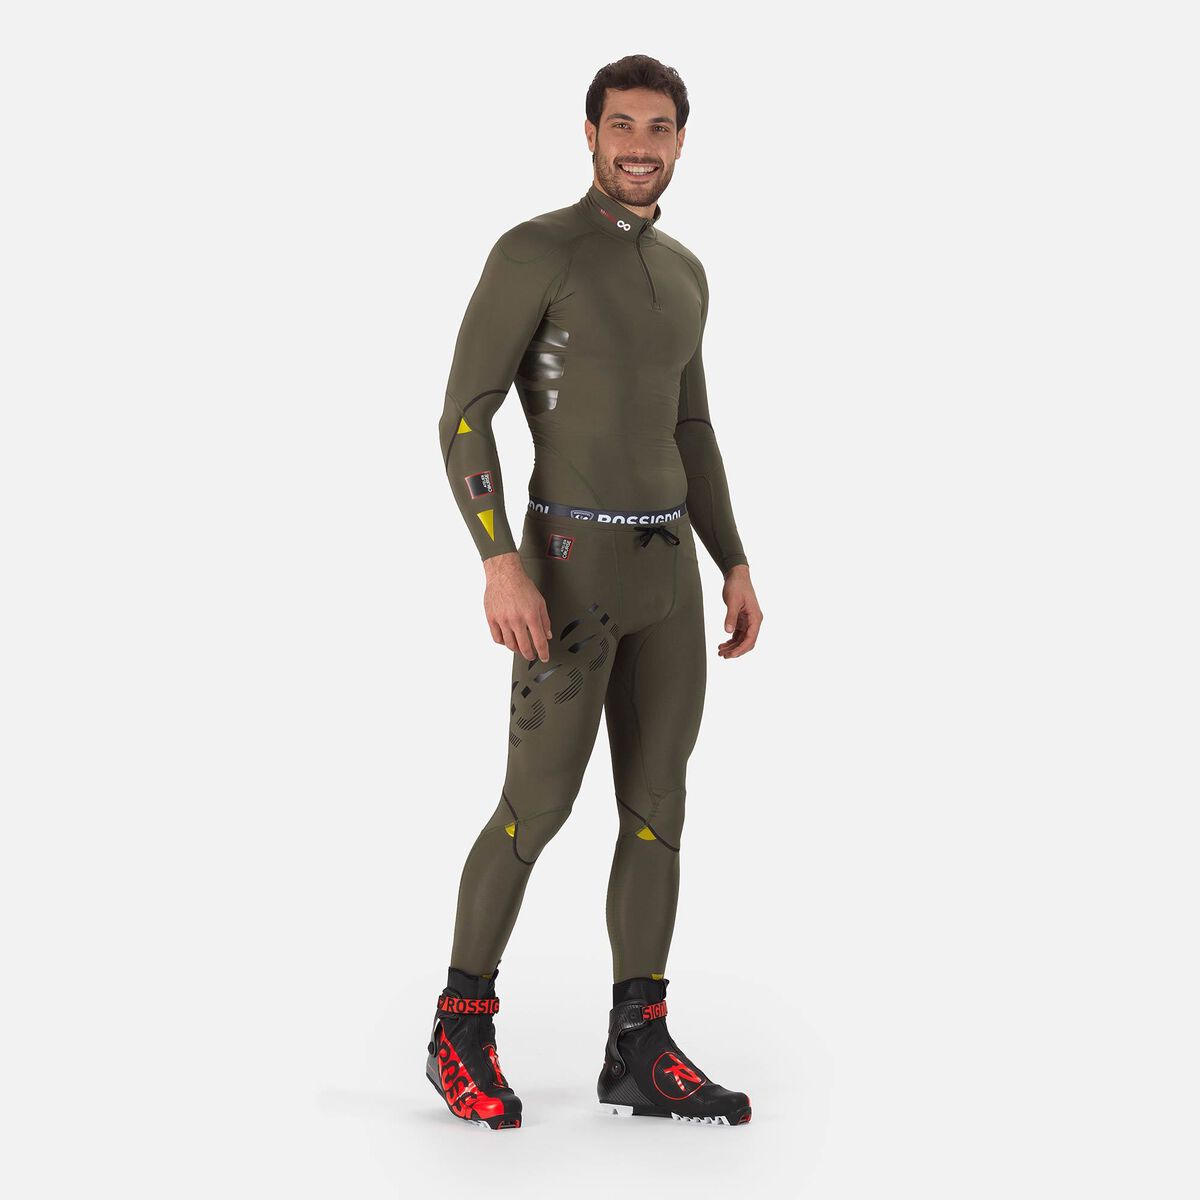 Rossignol Infini Compression Race Tights - Men's cross-country ski pants